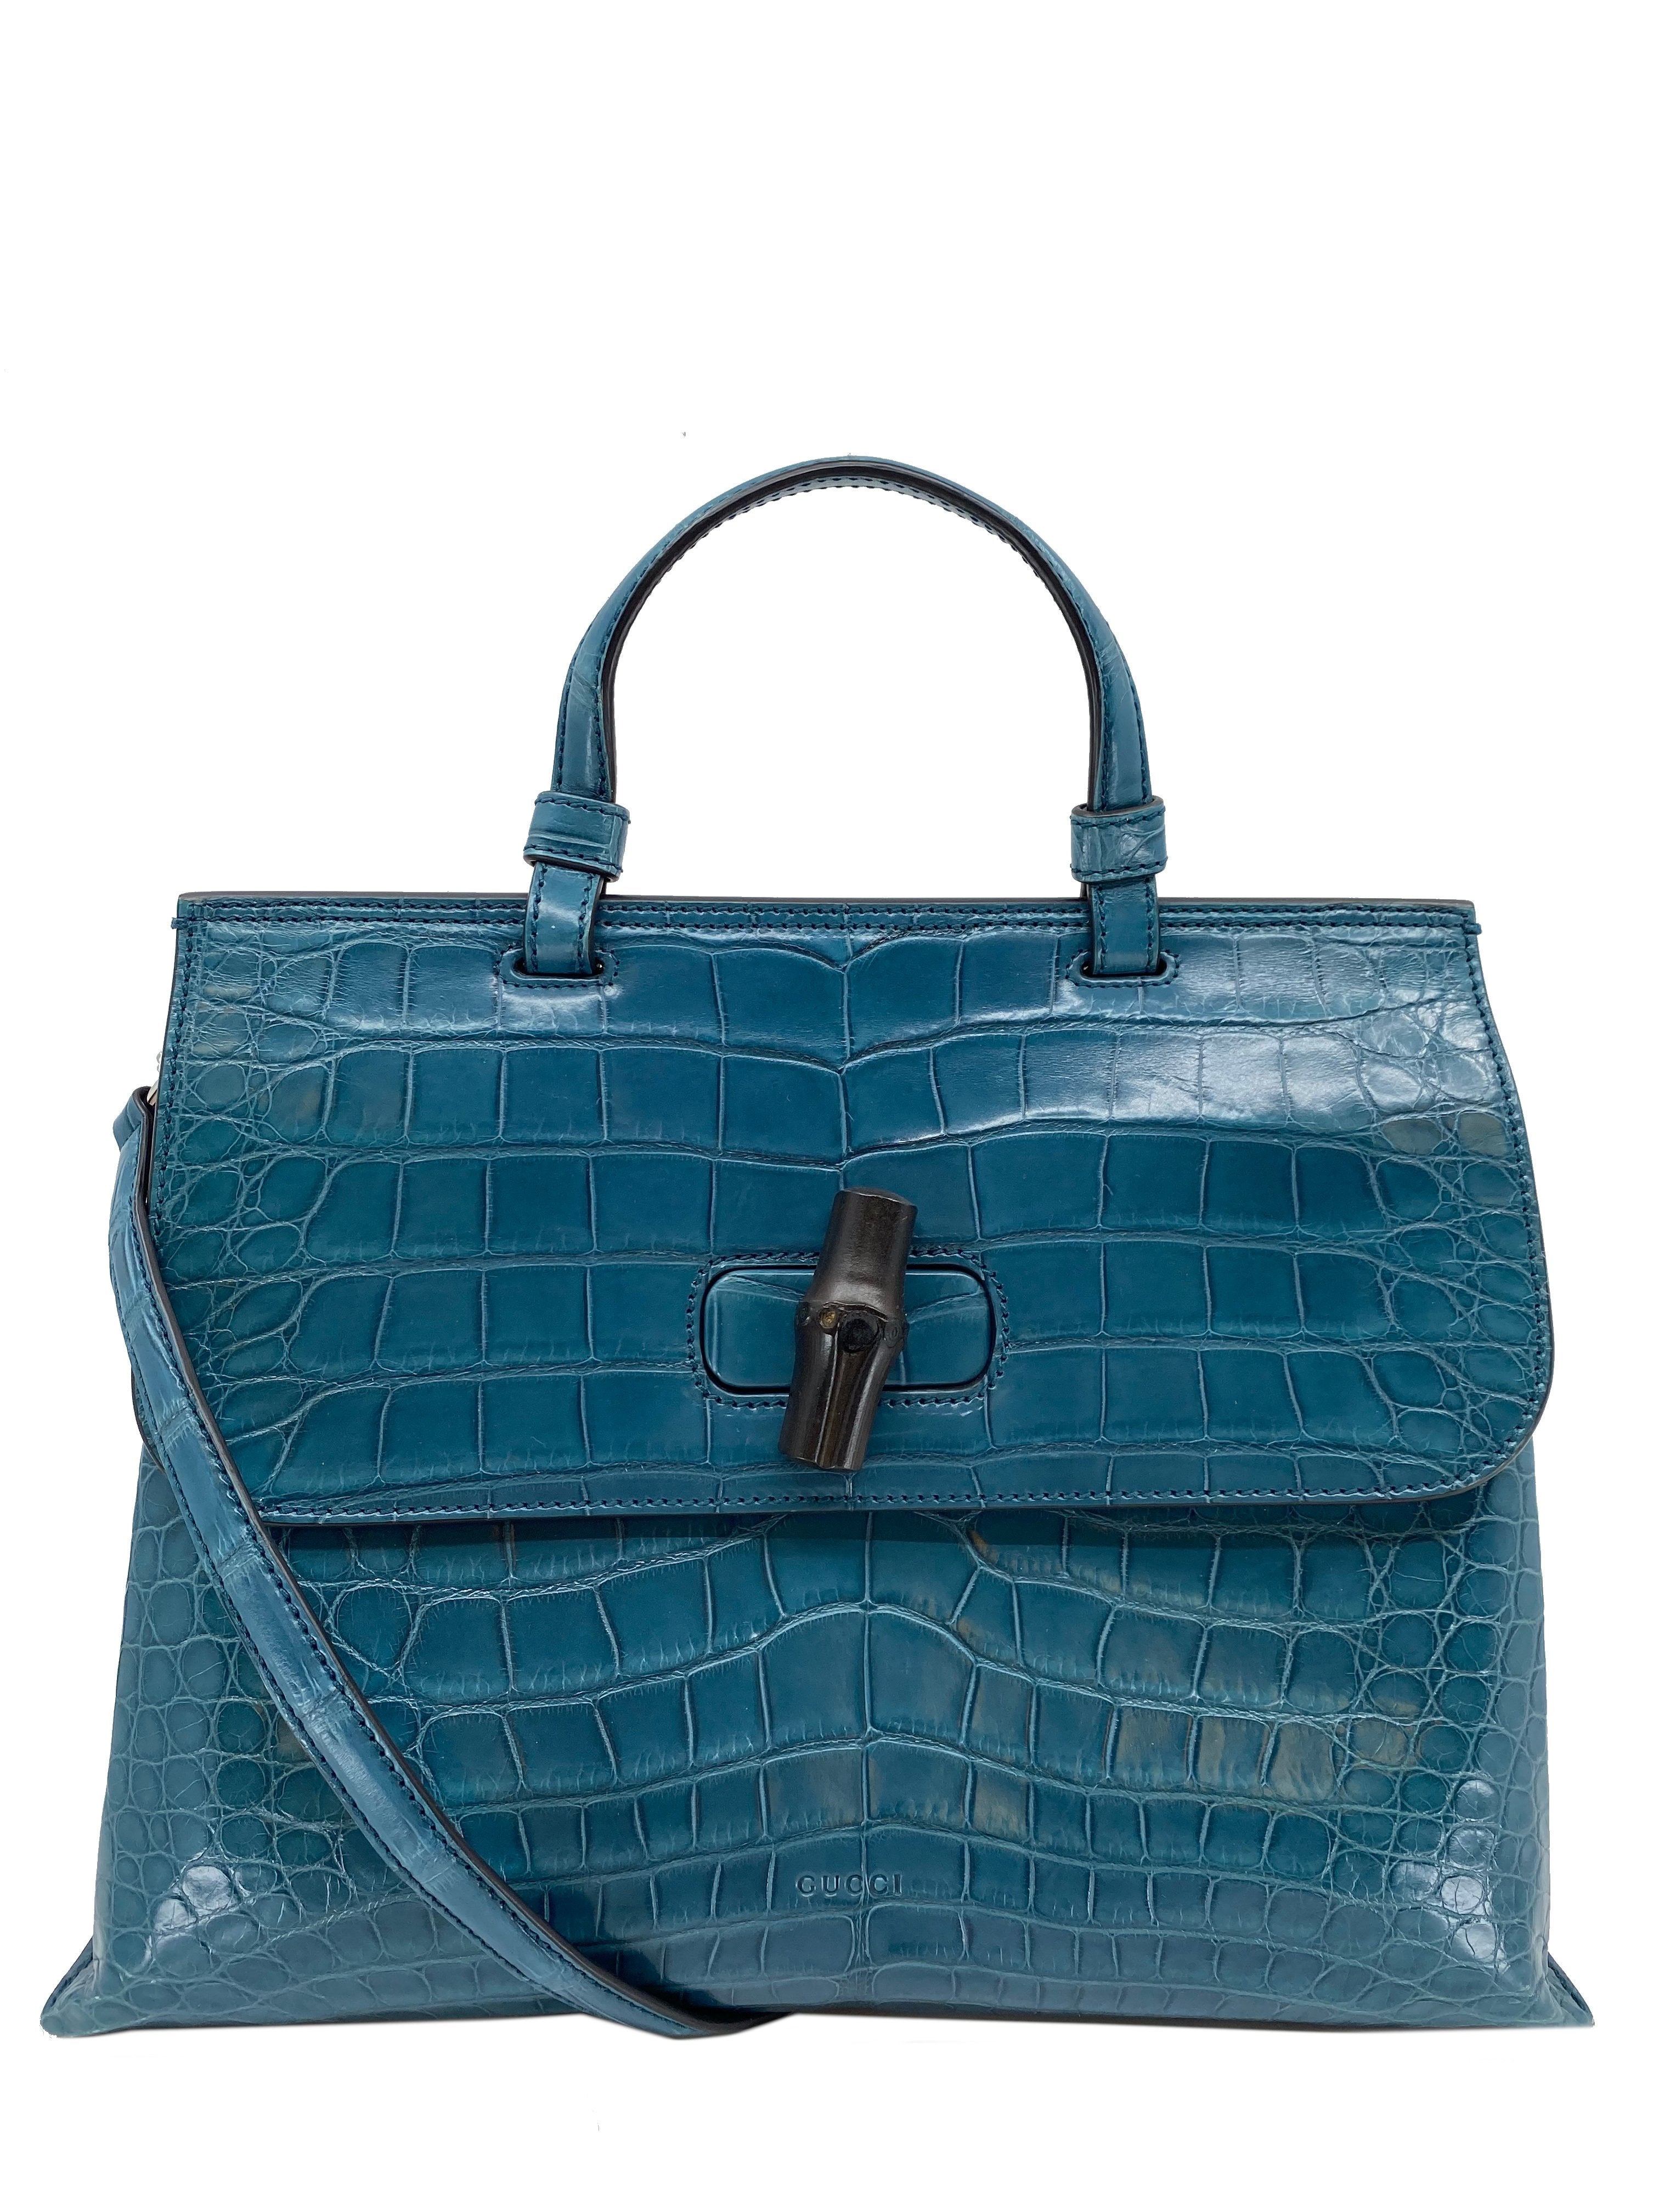 Gucci Bamboo 1947 small bag in blue leather